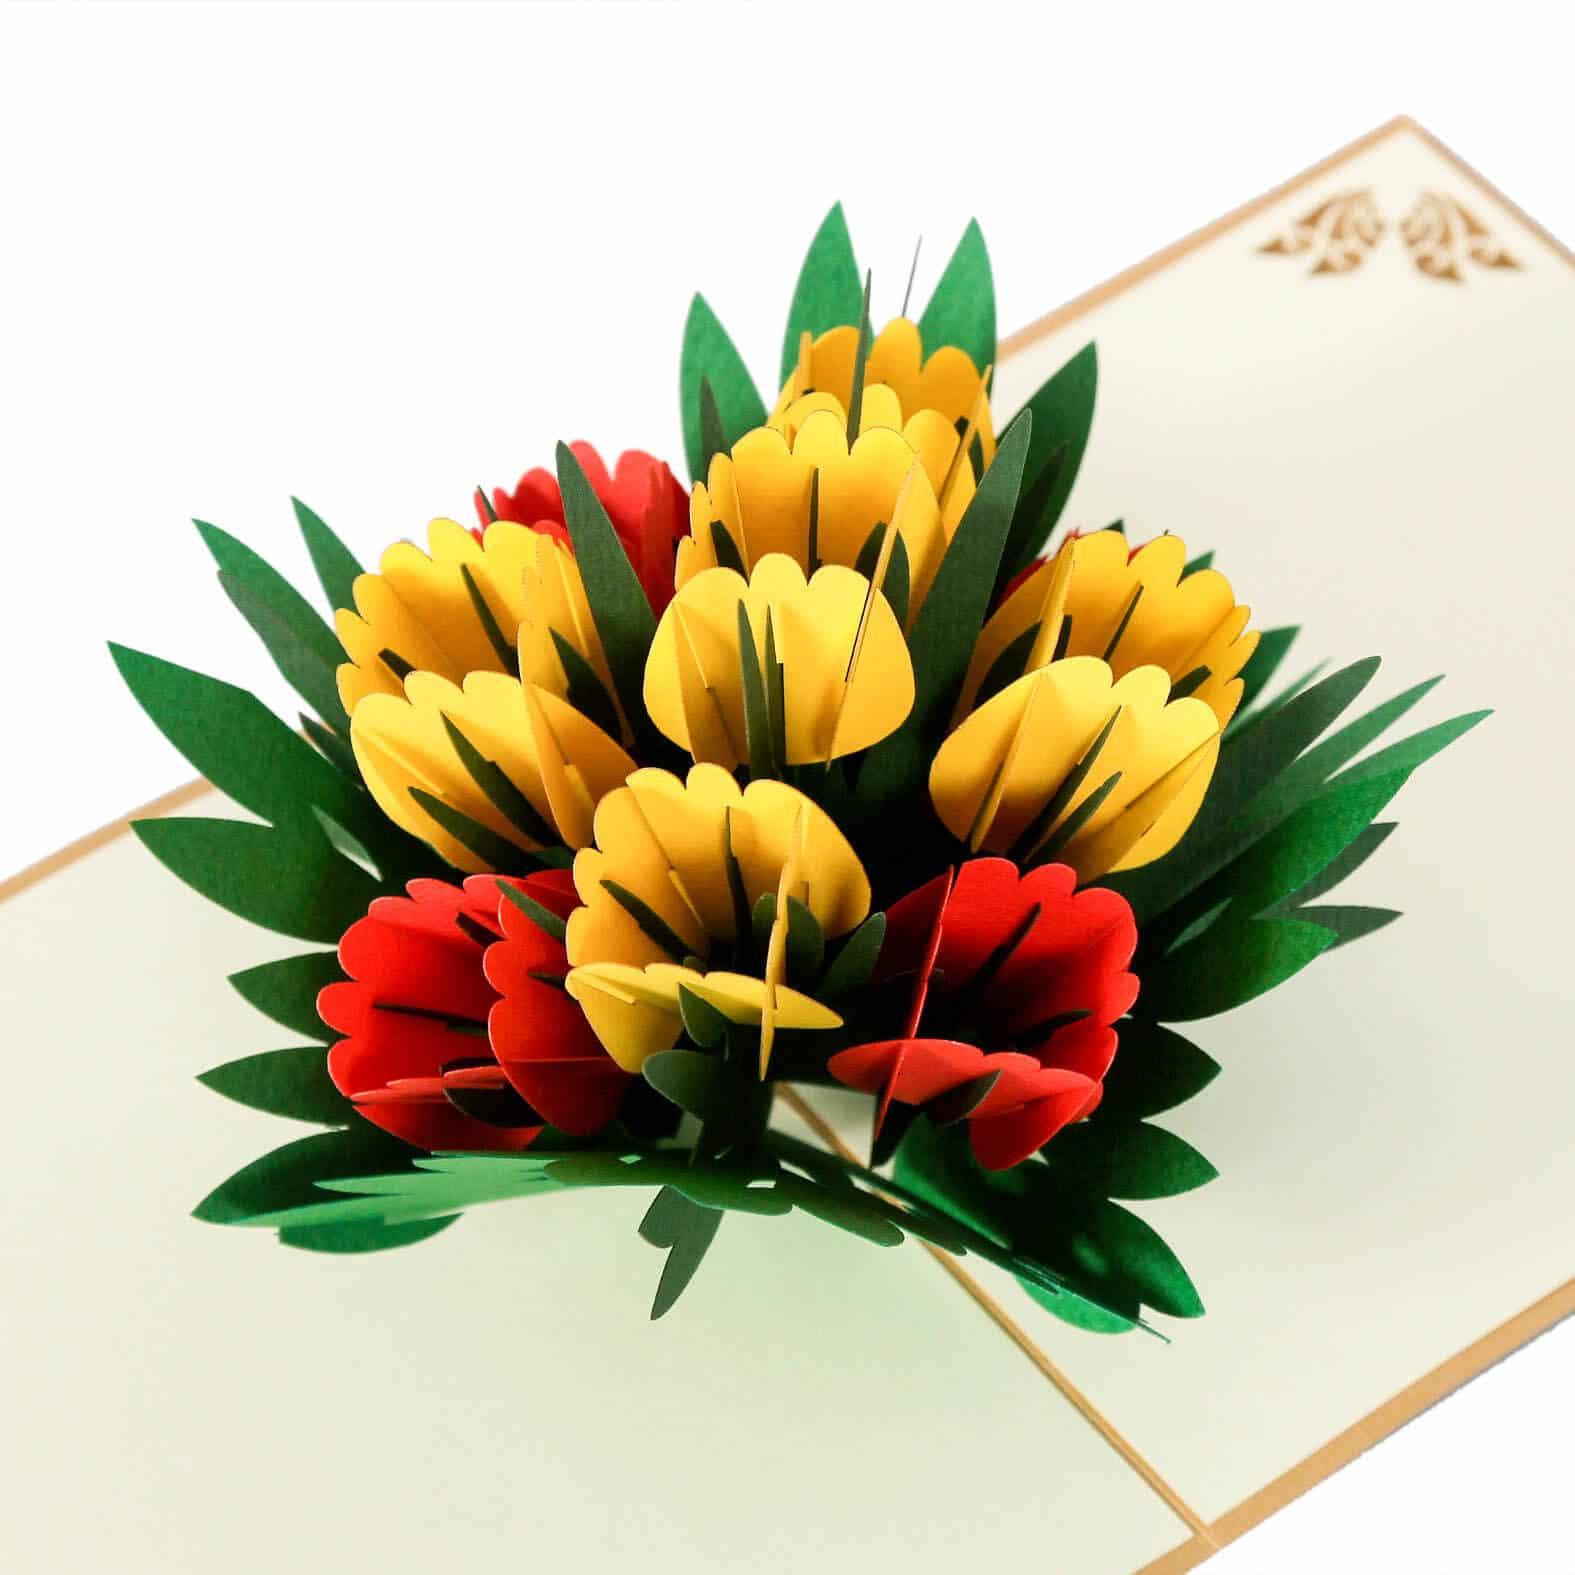 3D Pop Up Tulips Flowers Greeting Card Christmas Birthday New Year Invitation 